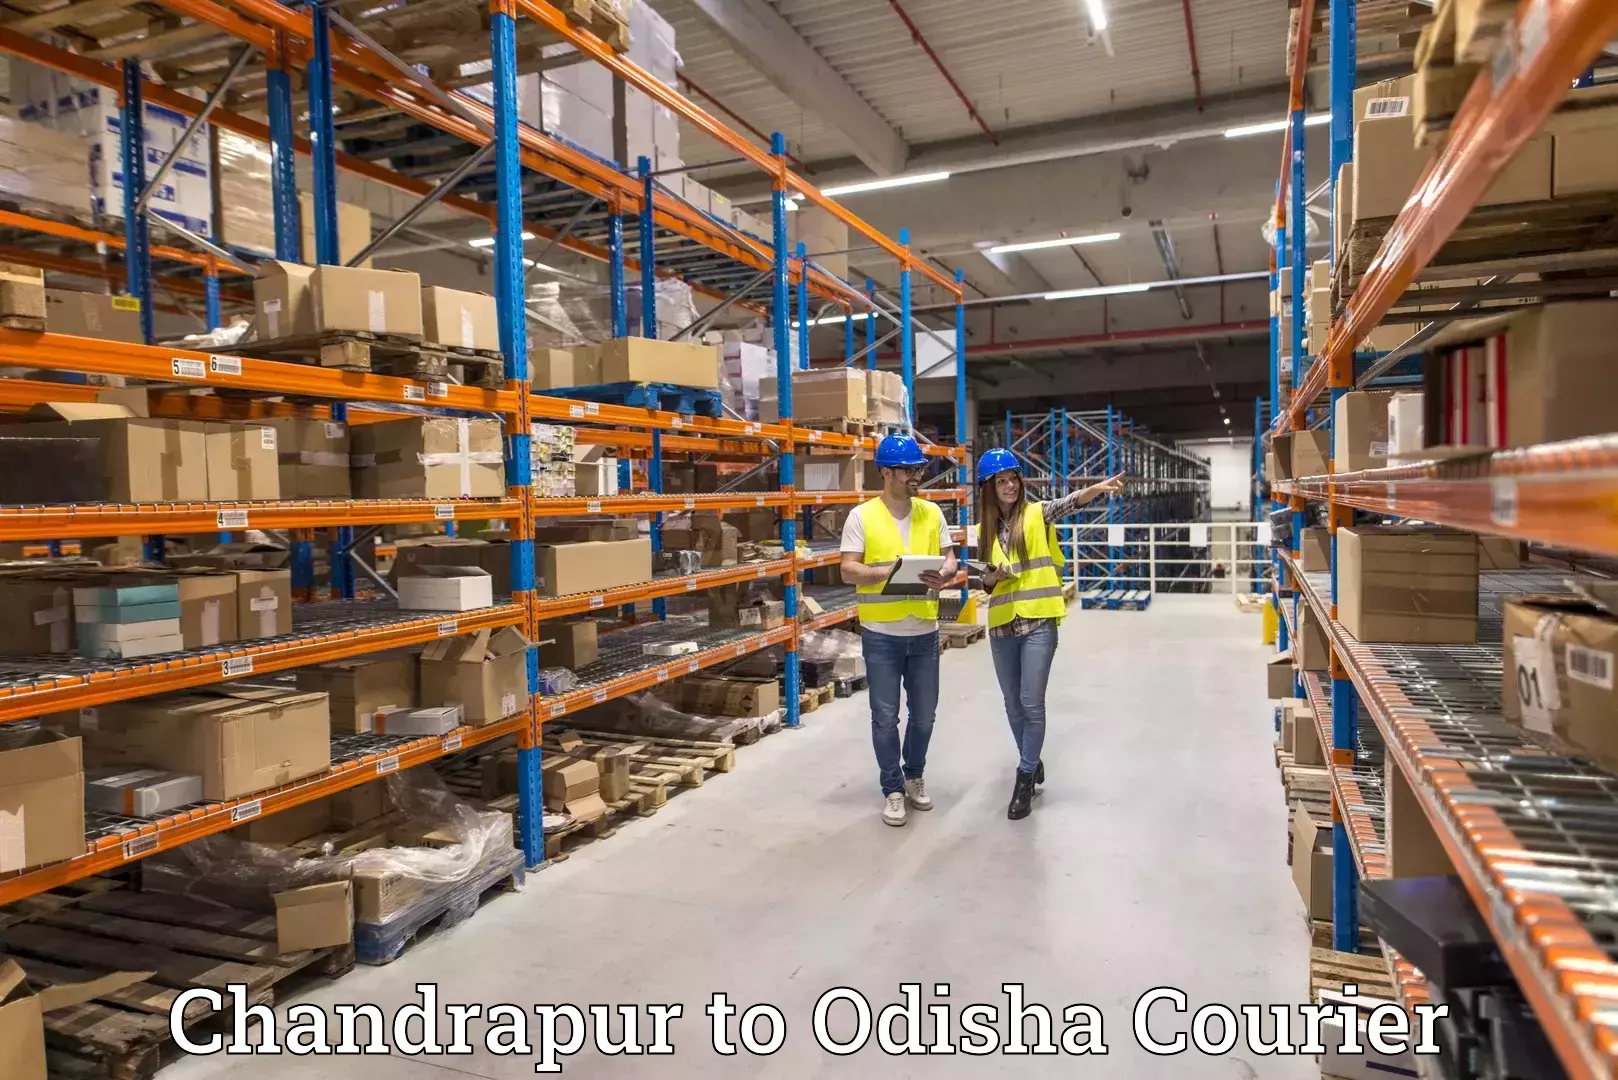 Courier service innovation Chandrapur to Paradip Port